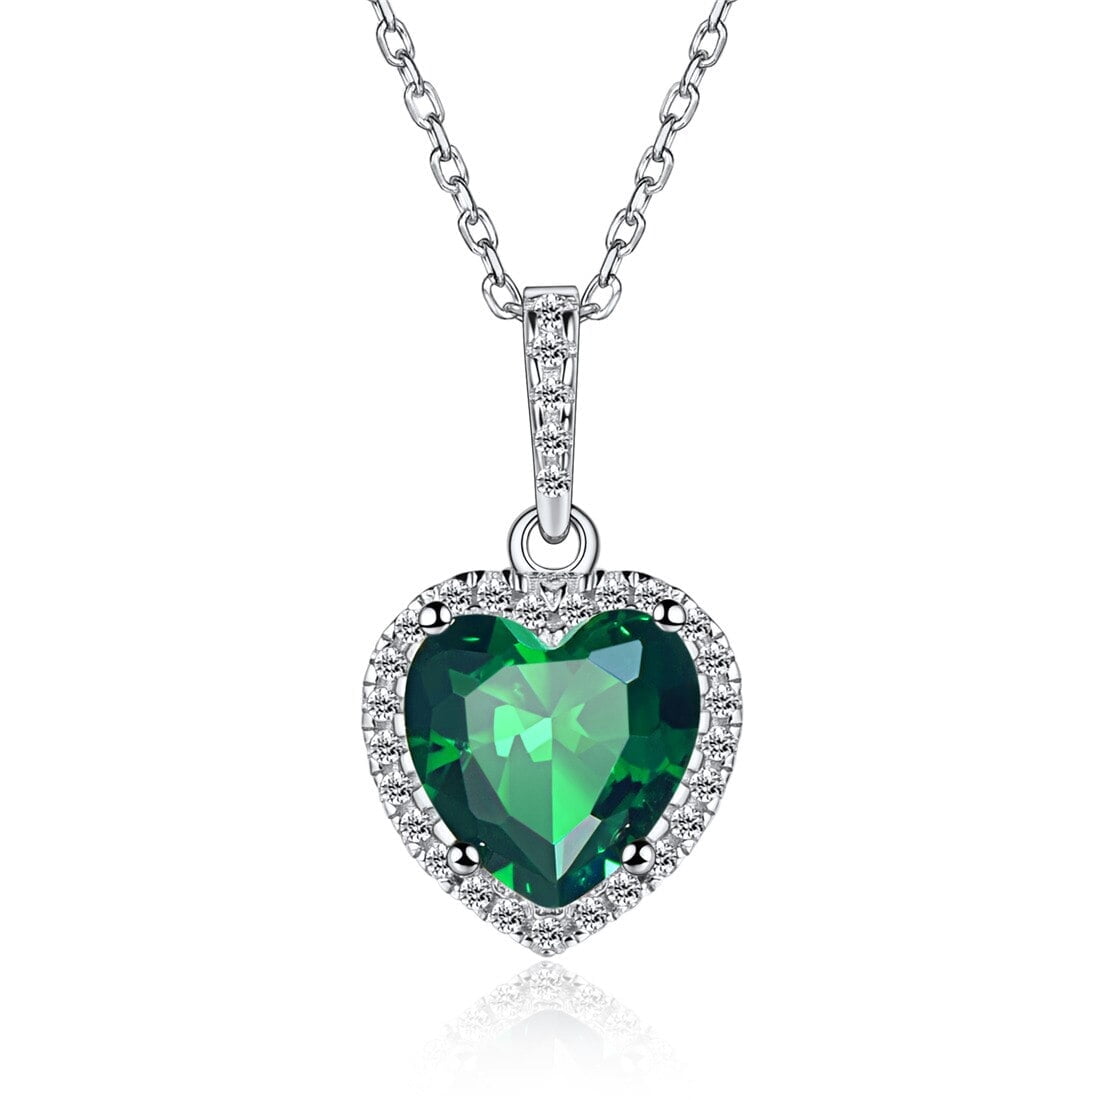 Dropship 925 Sterling Tree Life Charm For Women Green CZFamily Bead Charm  Tree Heart Charms For Bracelets Necklace to Sell Online at a Lower Price